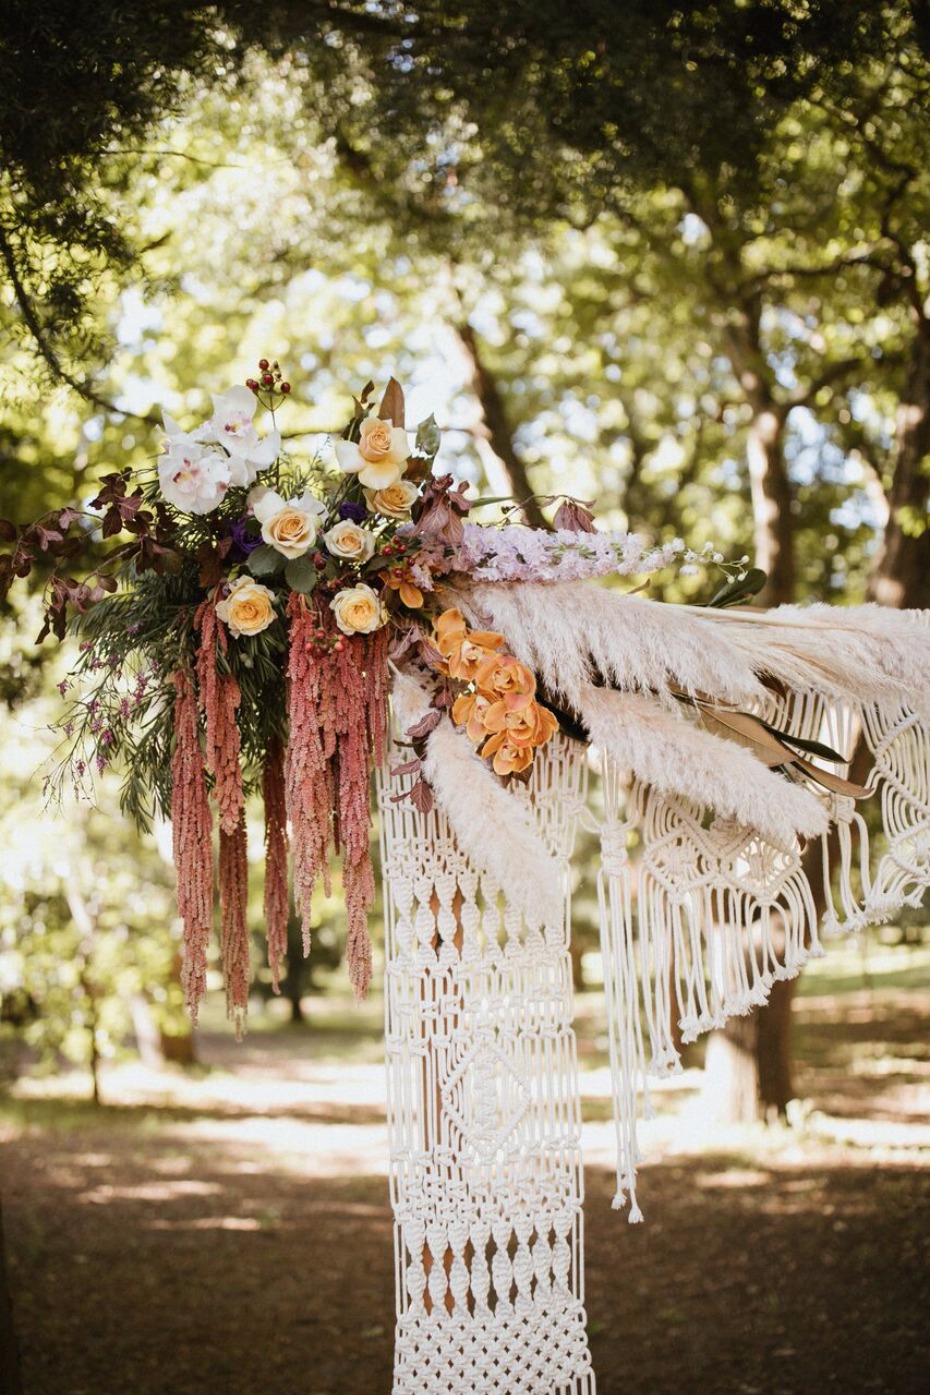 Macrame ceremony backdrop with florals